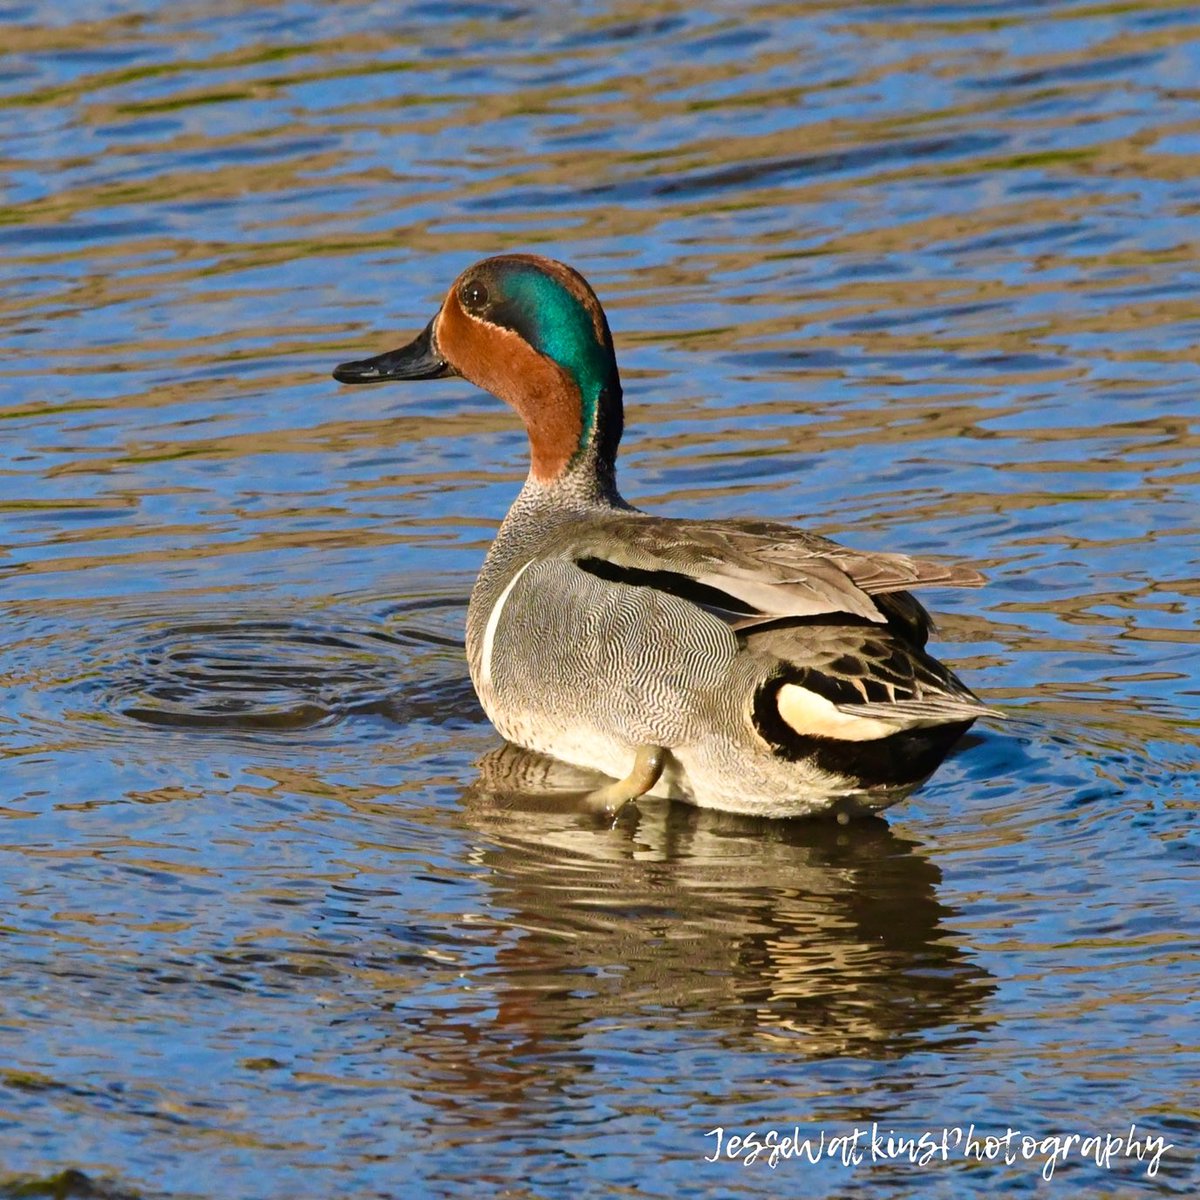 Happy Teal Tuesday!!! 

#greenwingedteal #teal #ducksunlimited #waterfowl #waterfowlphotography #birds #birdphotography